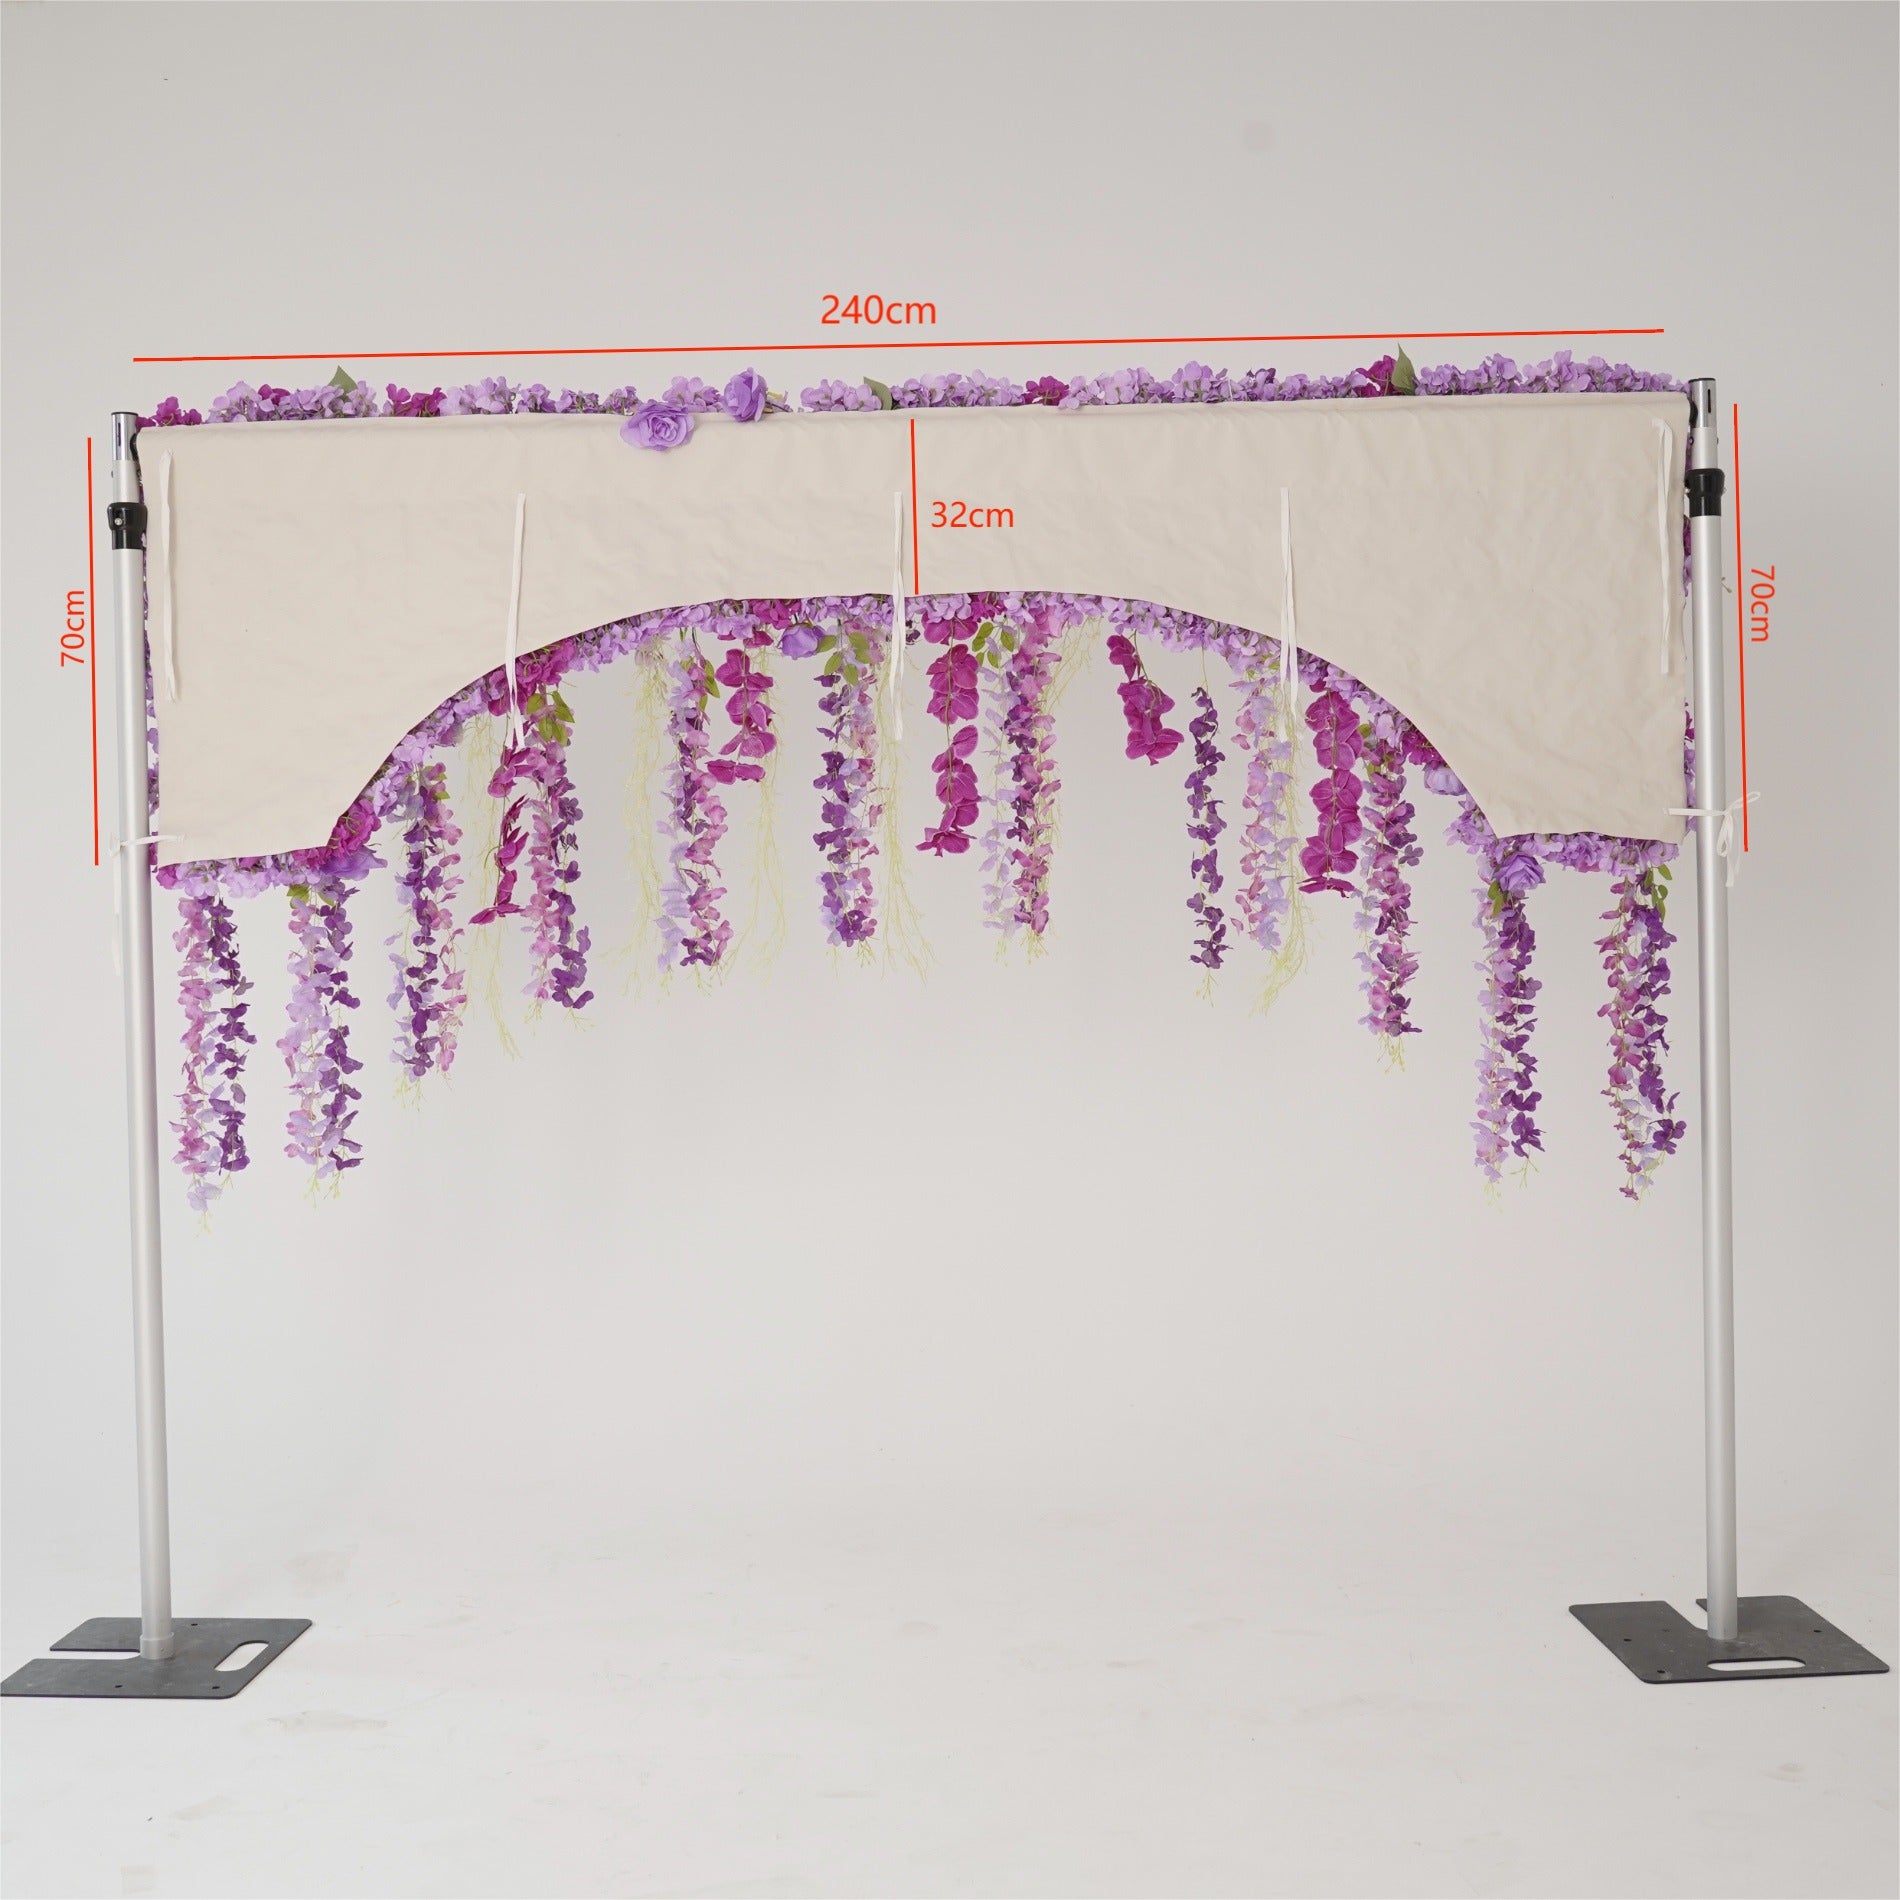 Flower Wall Purple Florals Cover Wedding Party Proposal Decor